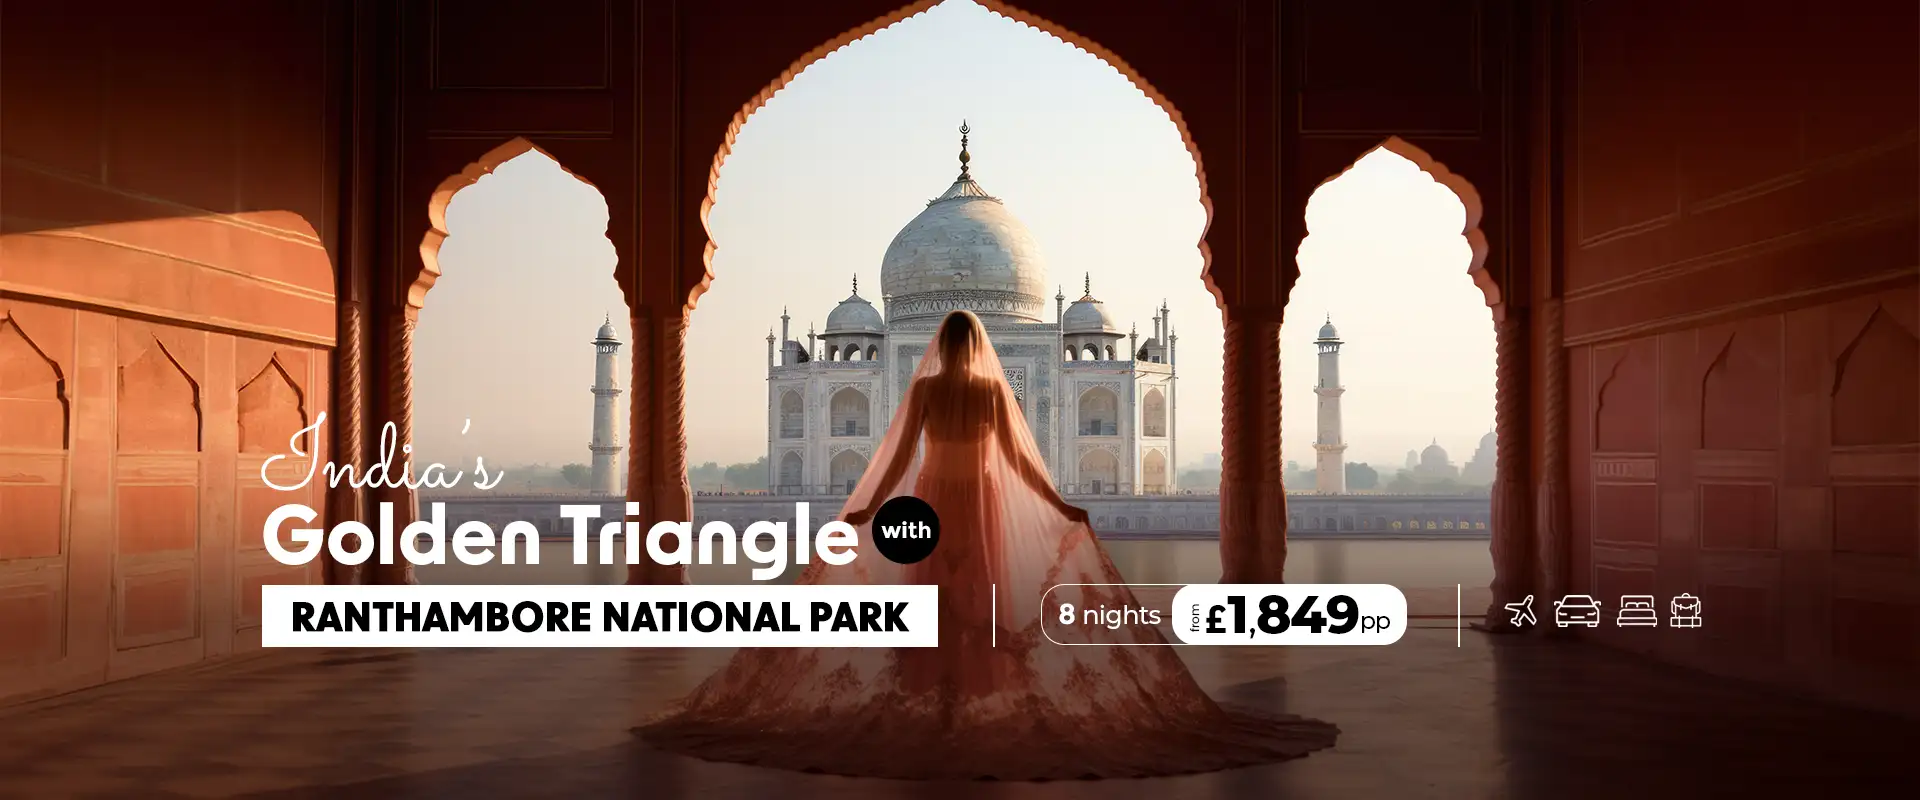 India’s Golden Triangle & Ranthambore National Park Deal